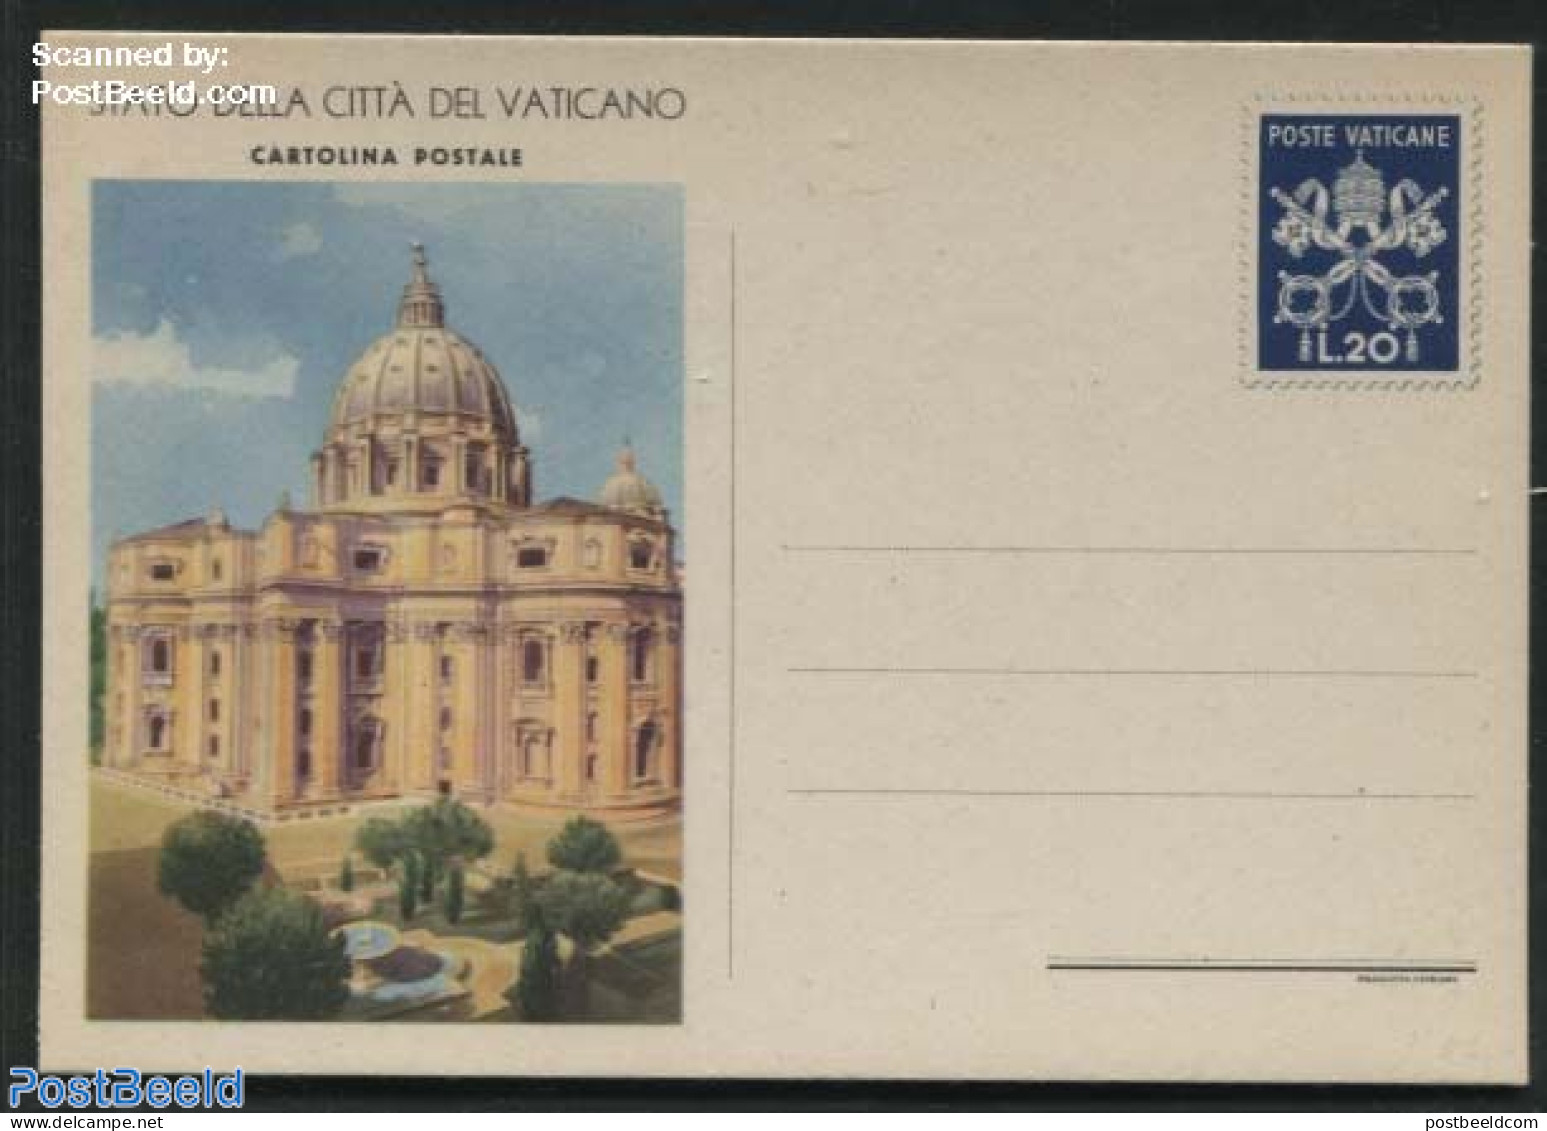 Vatican 1953 Postcard 20L, Dom And Garden, Unused Postal Stationary - Lettres & Documents